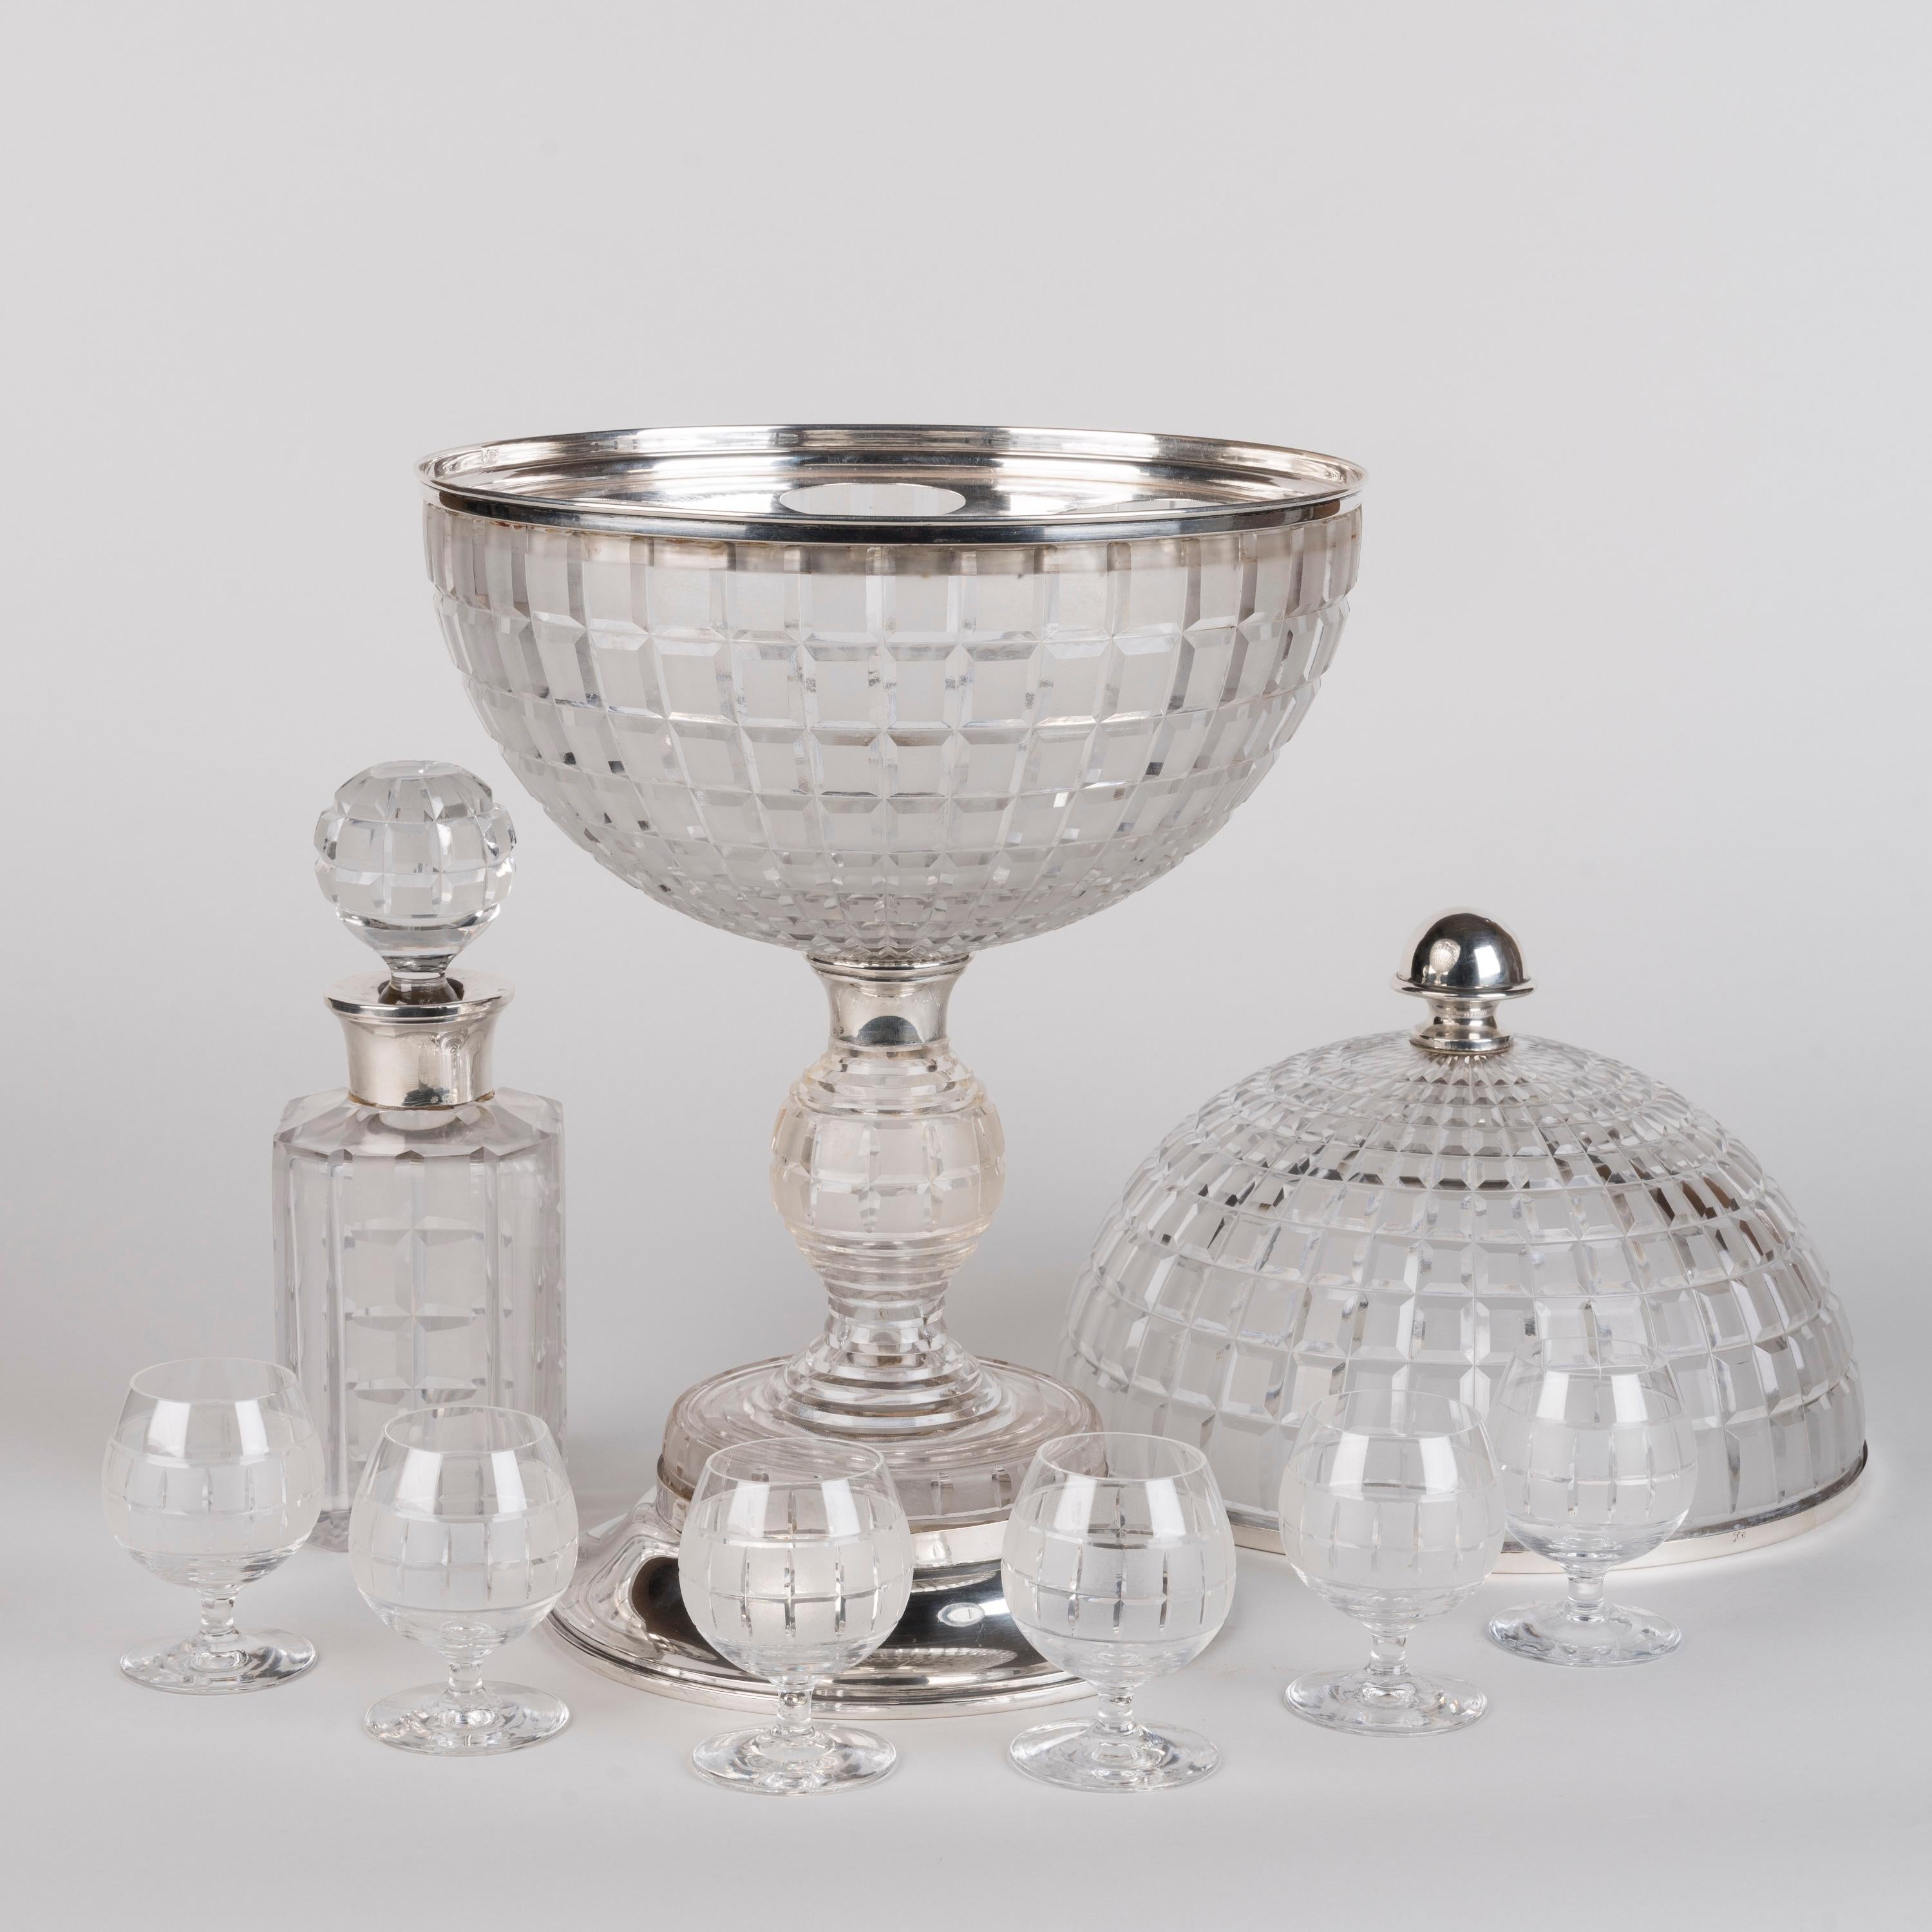 European Rare 1930s Art Deco Crystal and Solid Silver Globe Drinks Set For Sale